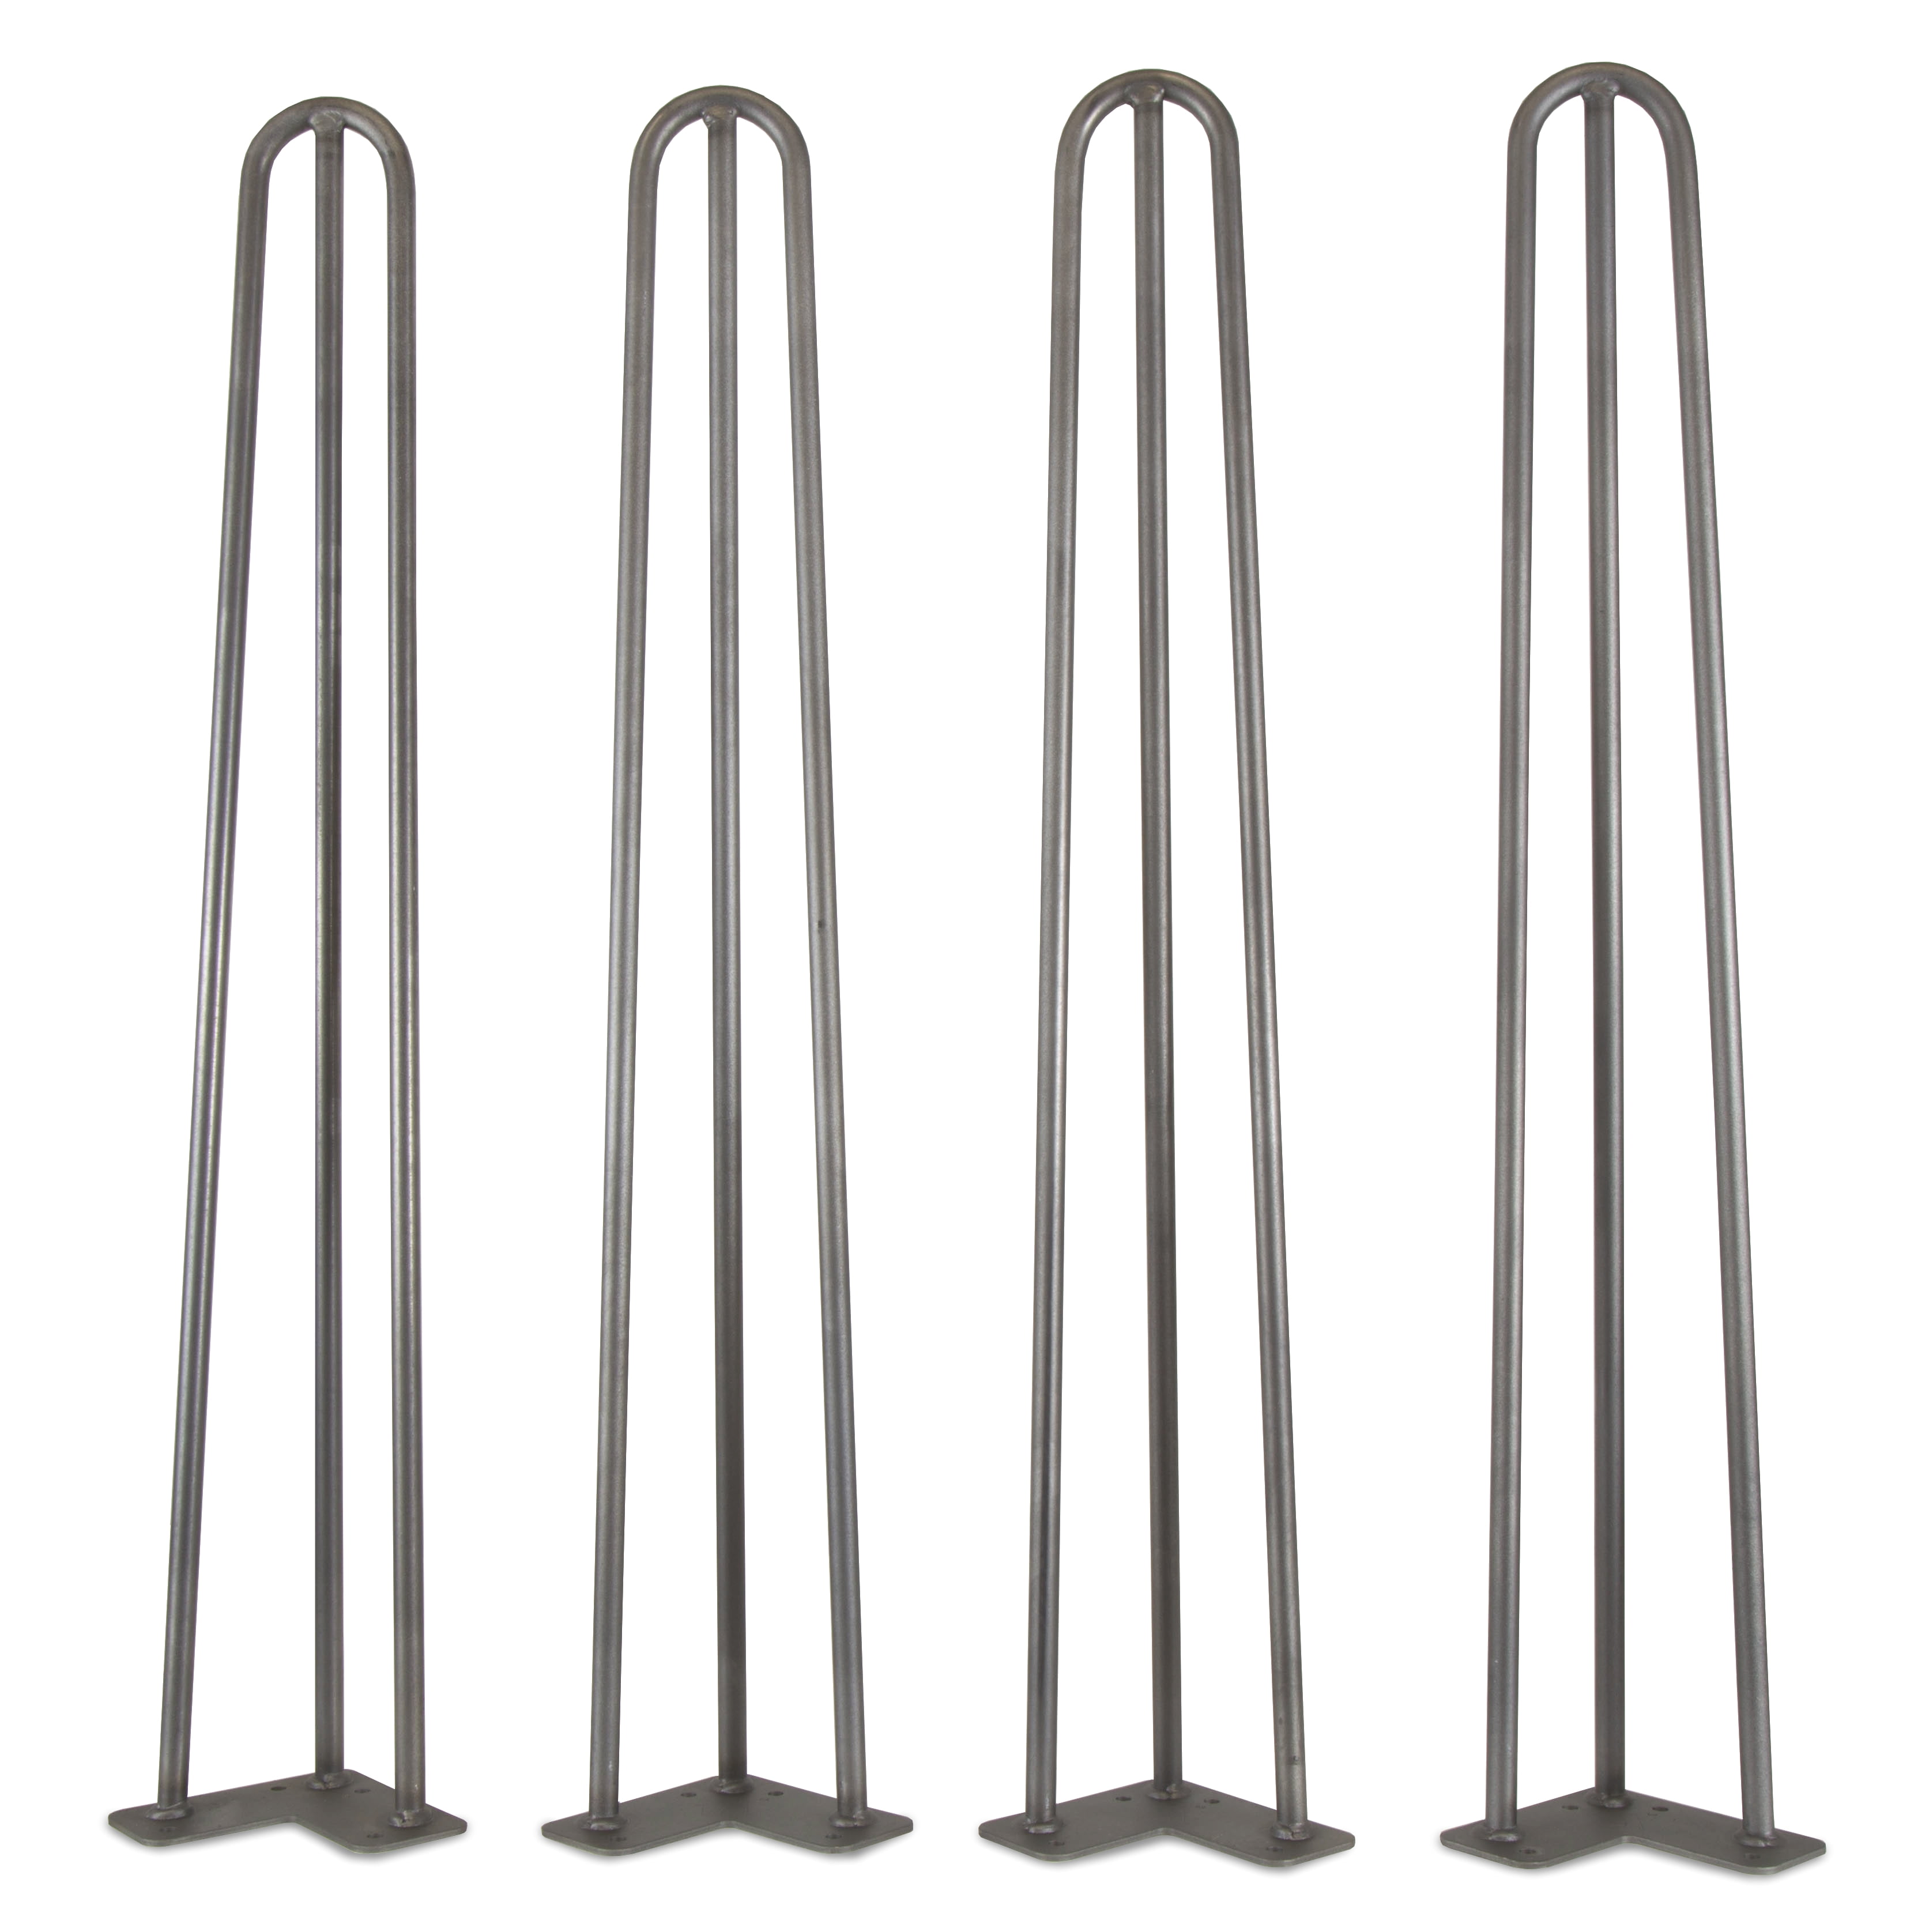 Bonus Rubber Floor Protectors by INTERESTHING Home Mid-Century Modern Legs for Dining and End Tables 28 Inch Hairpin Legs 4 Easy to Install Metal Legs for Furniture Chairs Home DIY Projects